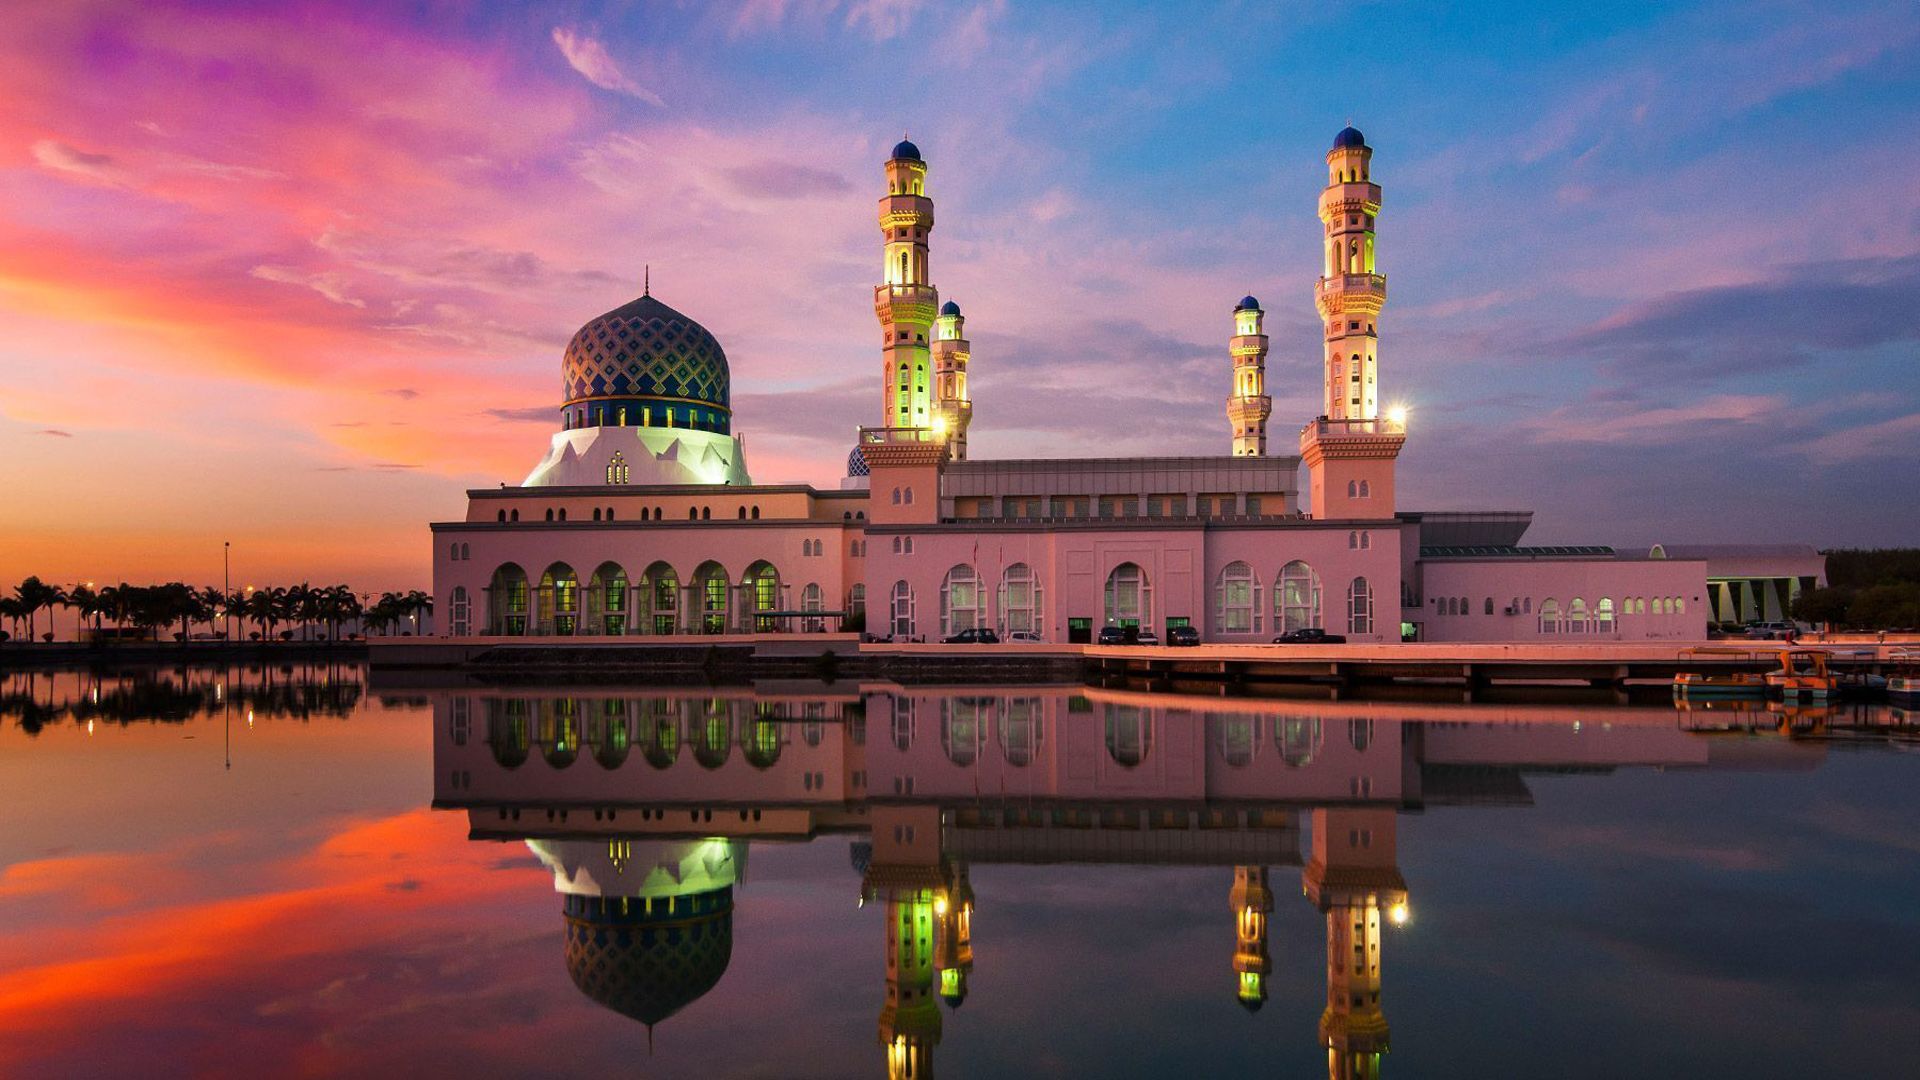 Kota Kinabalu City Mosque Is The Second Main Mosque In Kota